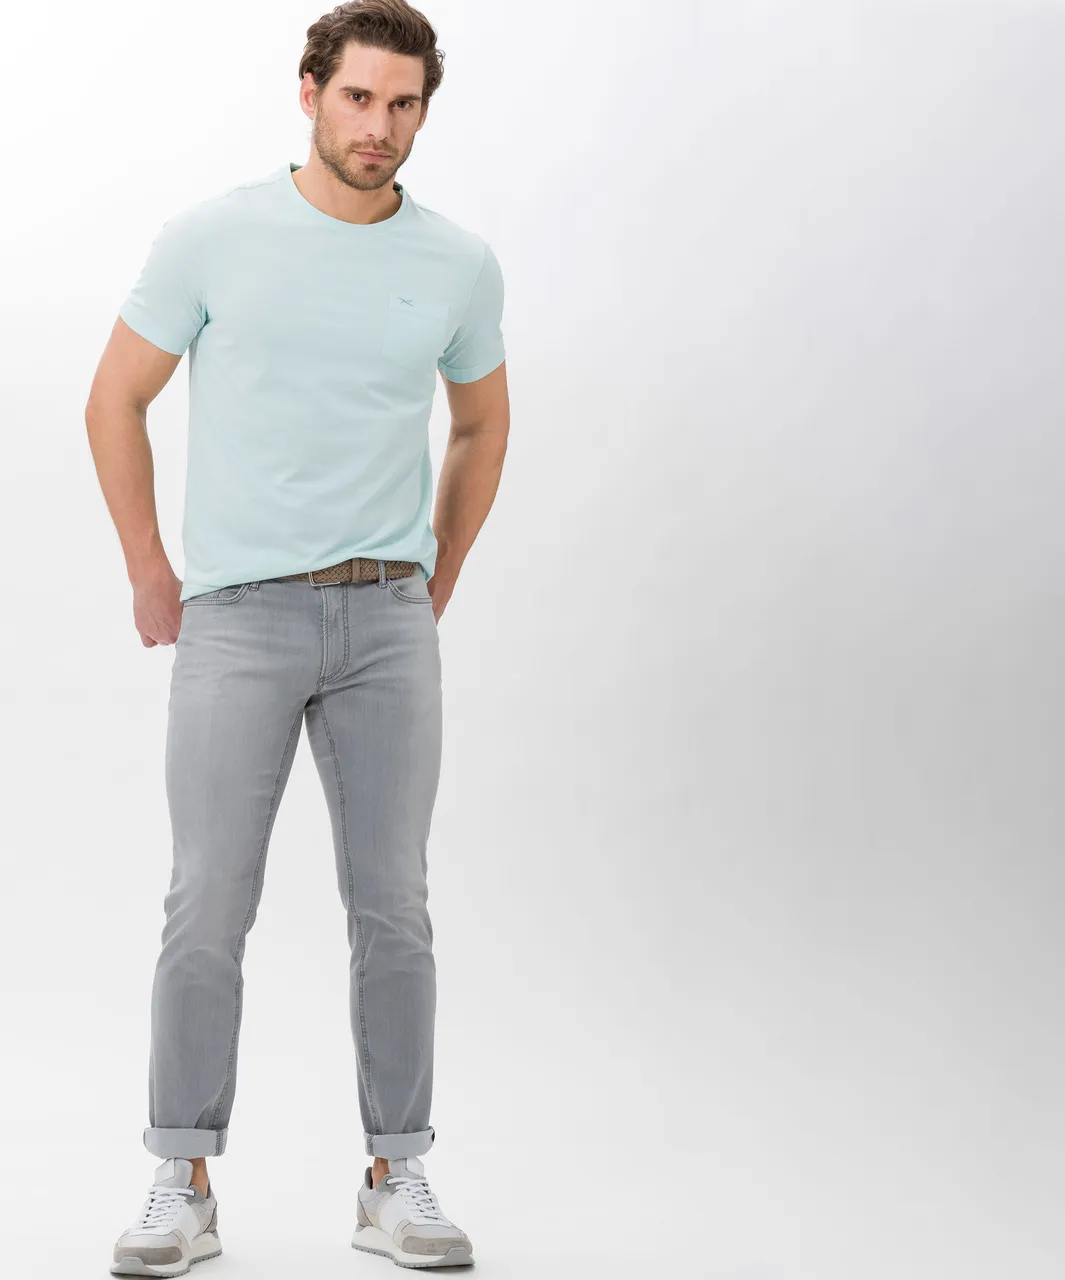 Slim Fit Jeans STYLE.CHUCK